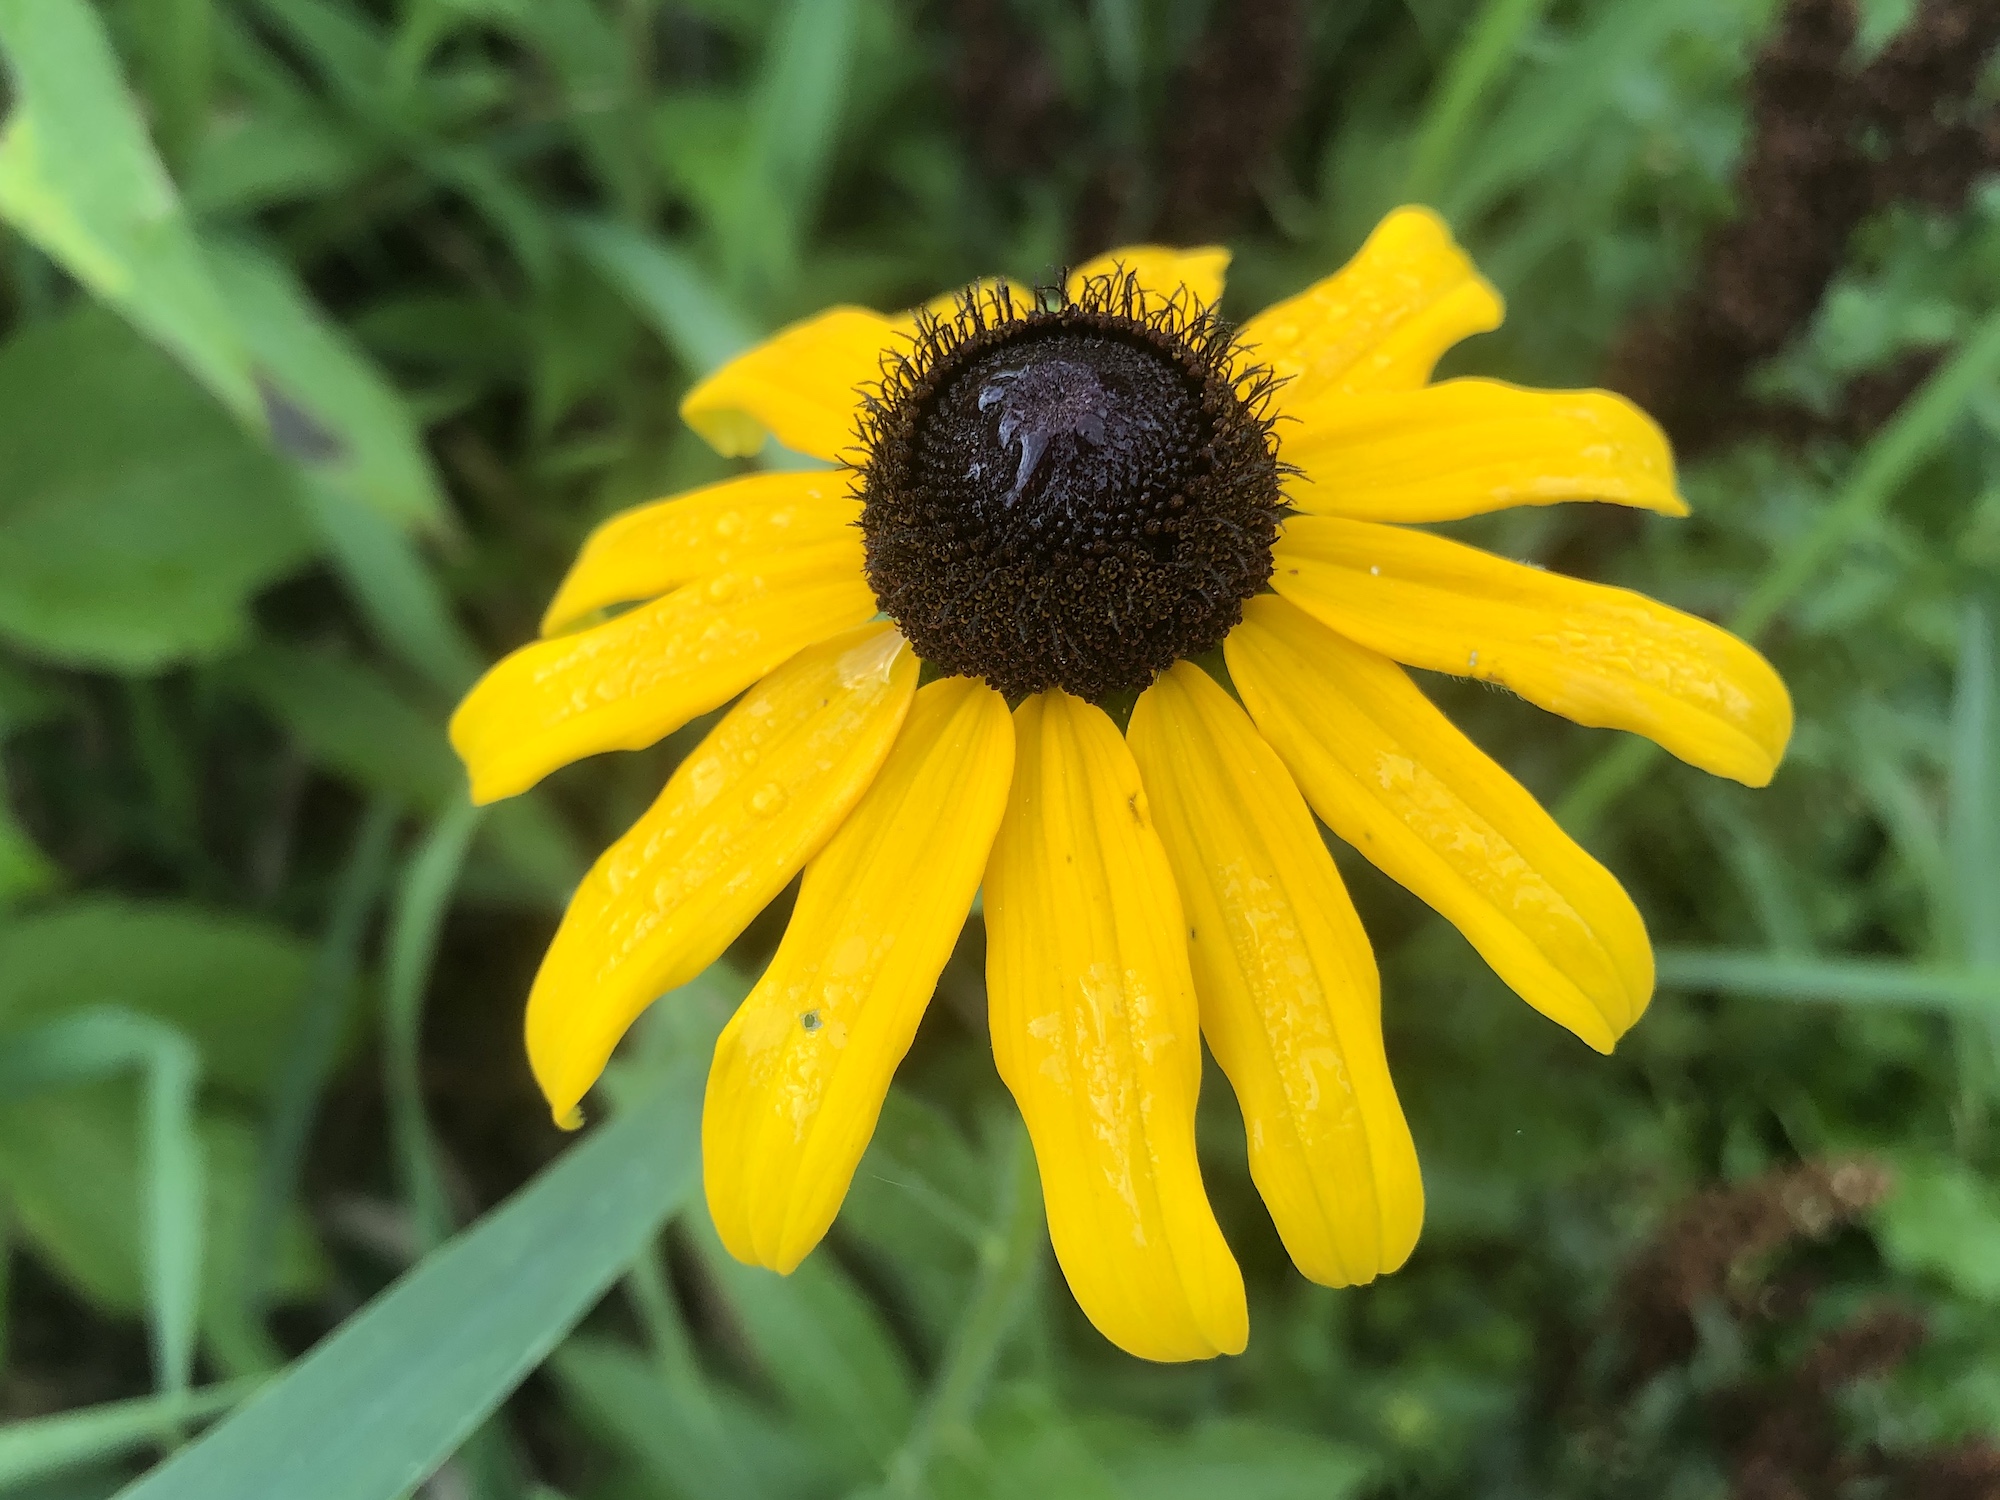 Black-eyed Susan on banks of Marion Dunn Pond in Madison, Wisconsin on July 14, 2020.